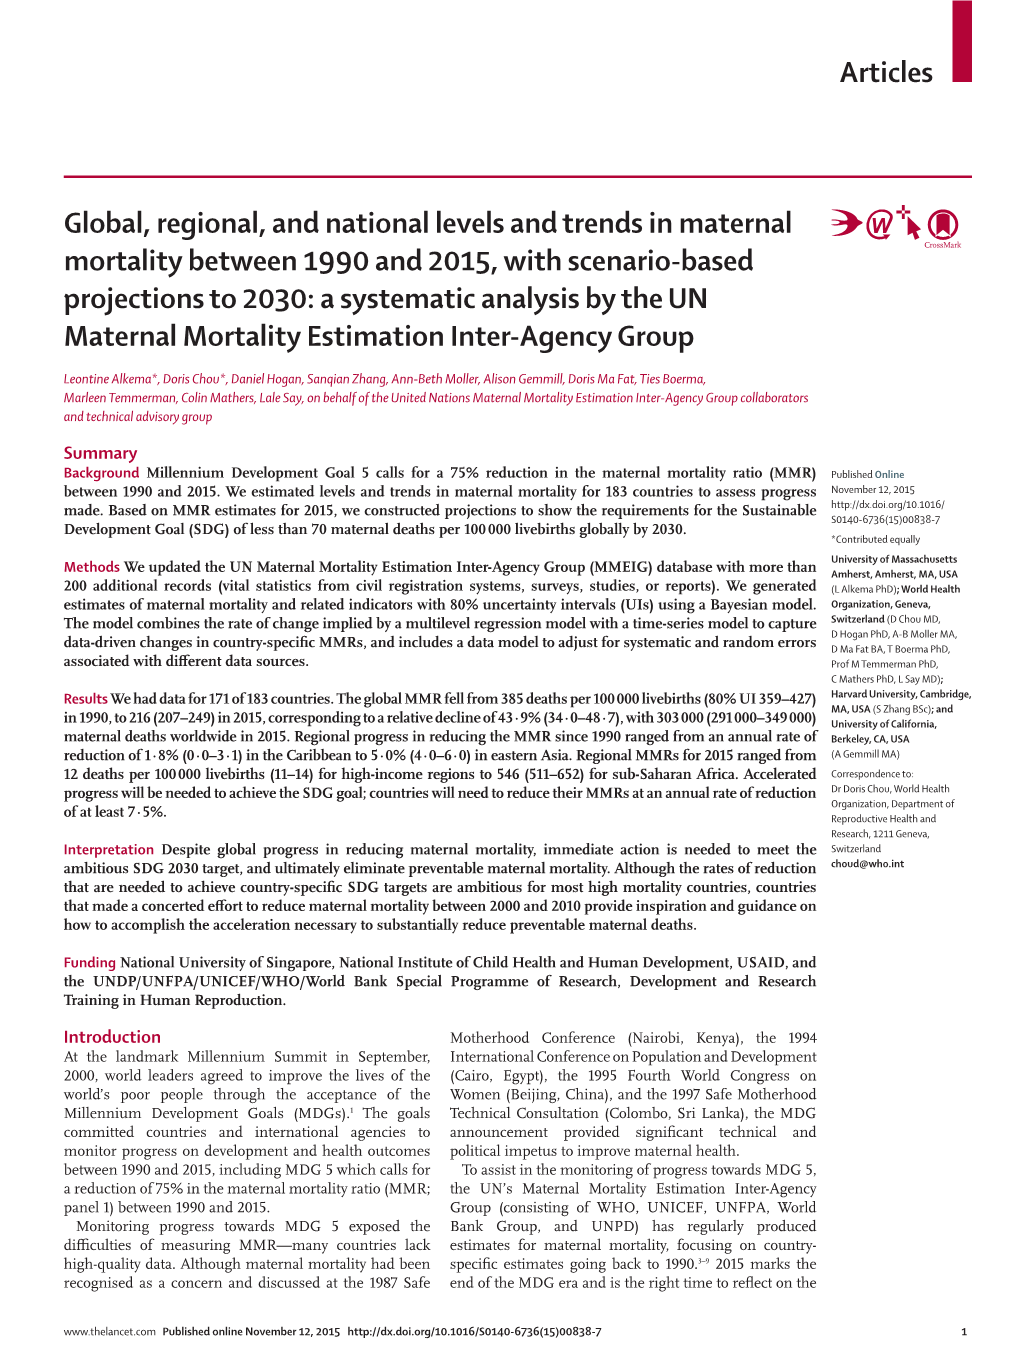 Articles Global, Regional, and National Levels and Trends in Maternal Mortality Between 1990 and 2015, with Scenario-Based Proje